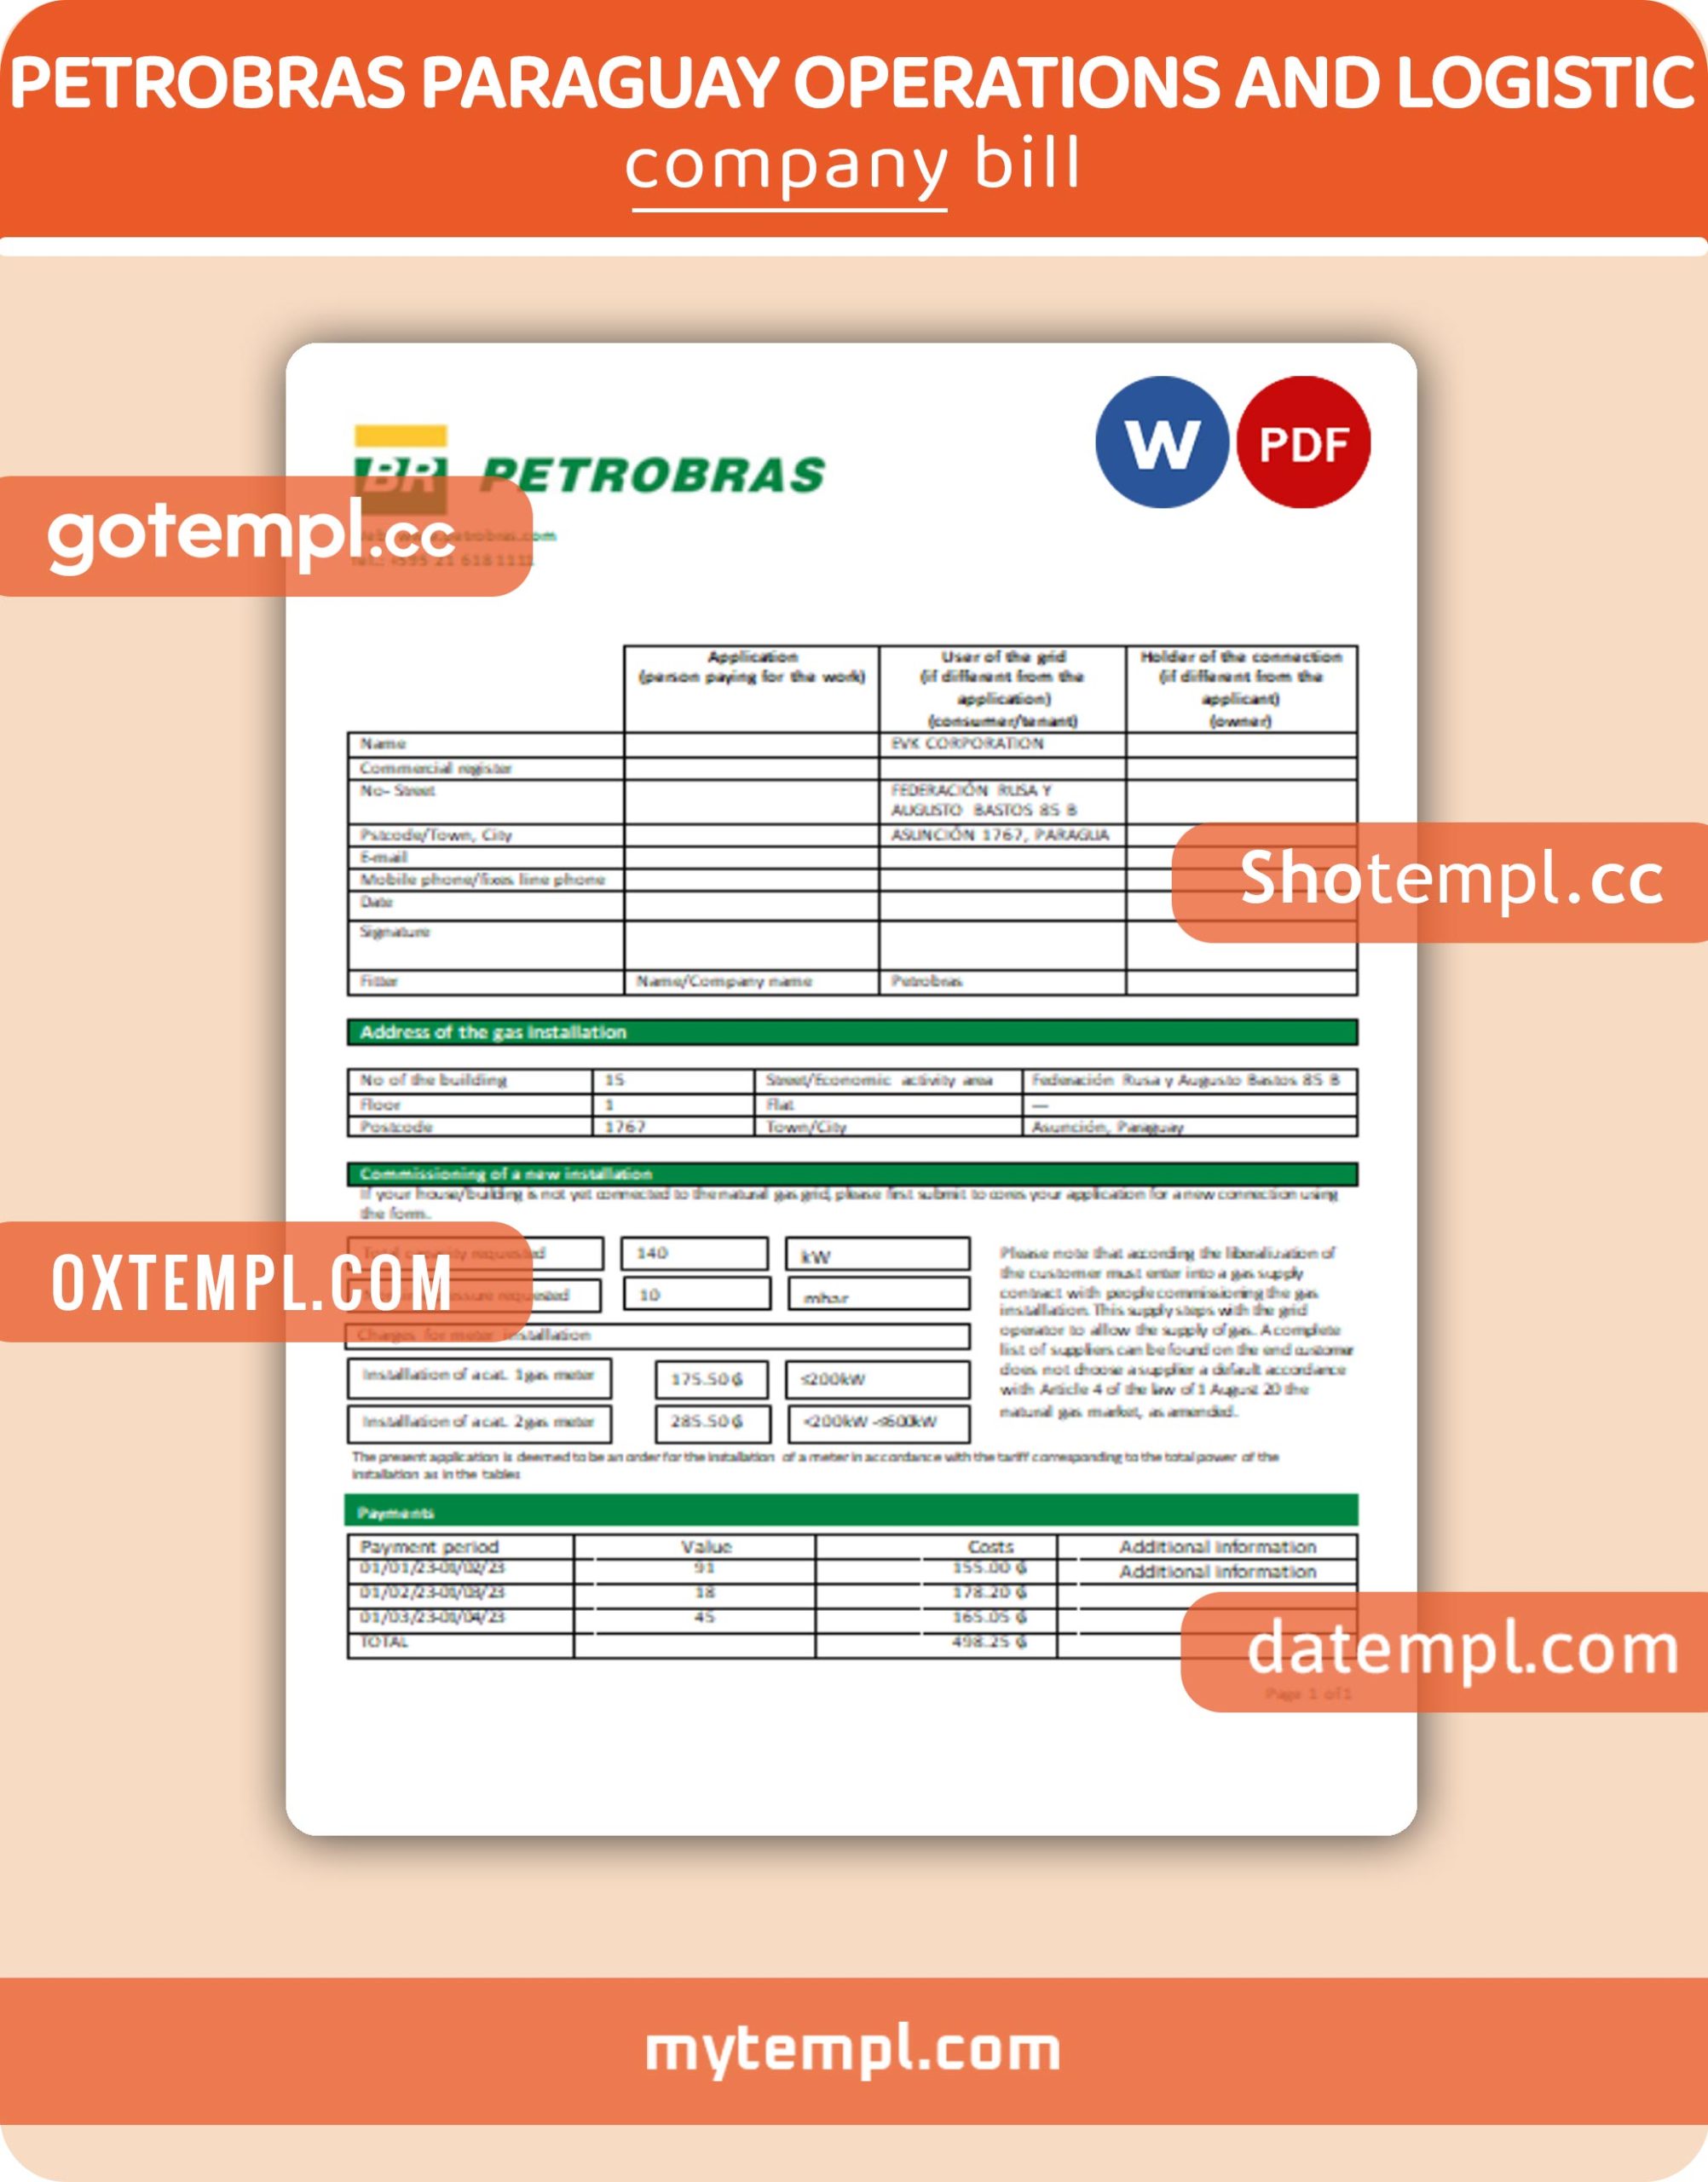 Ukraine Oshadbank bank statement easy to fill template in Excel and PDF format